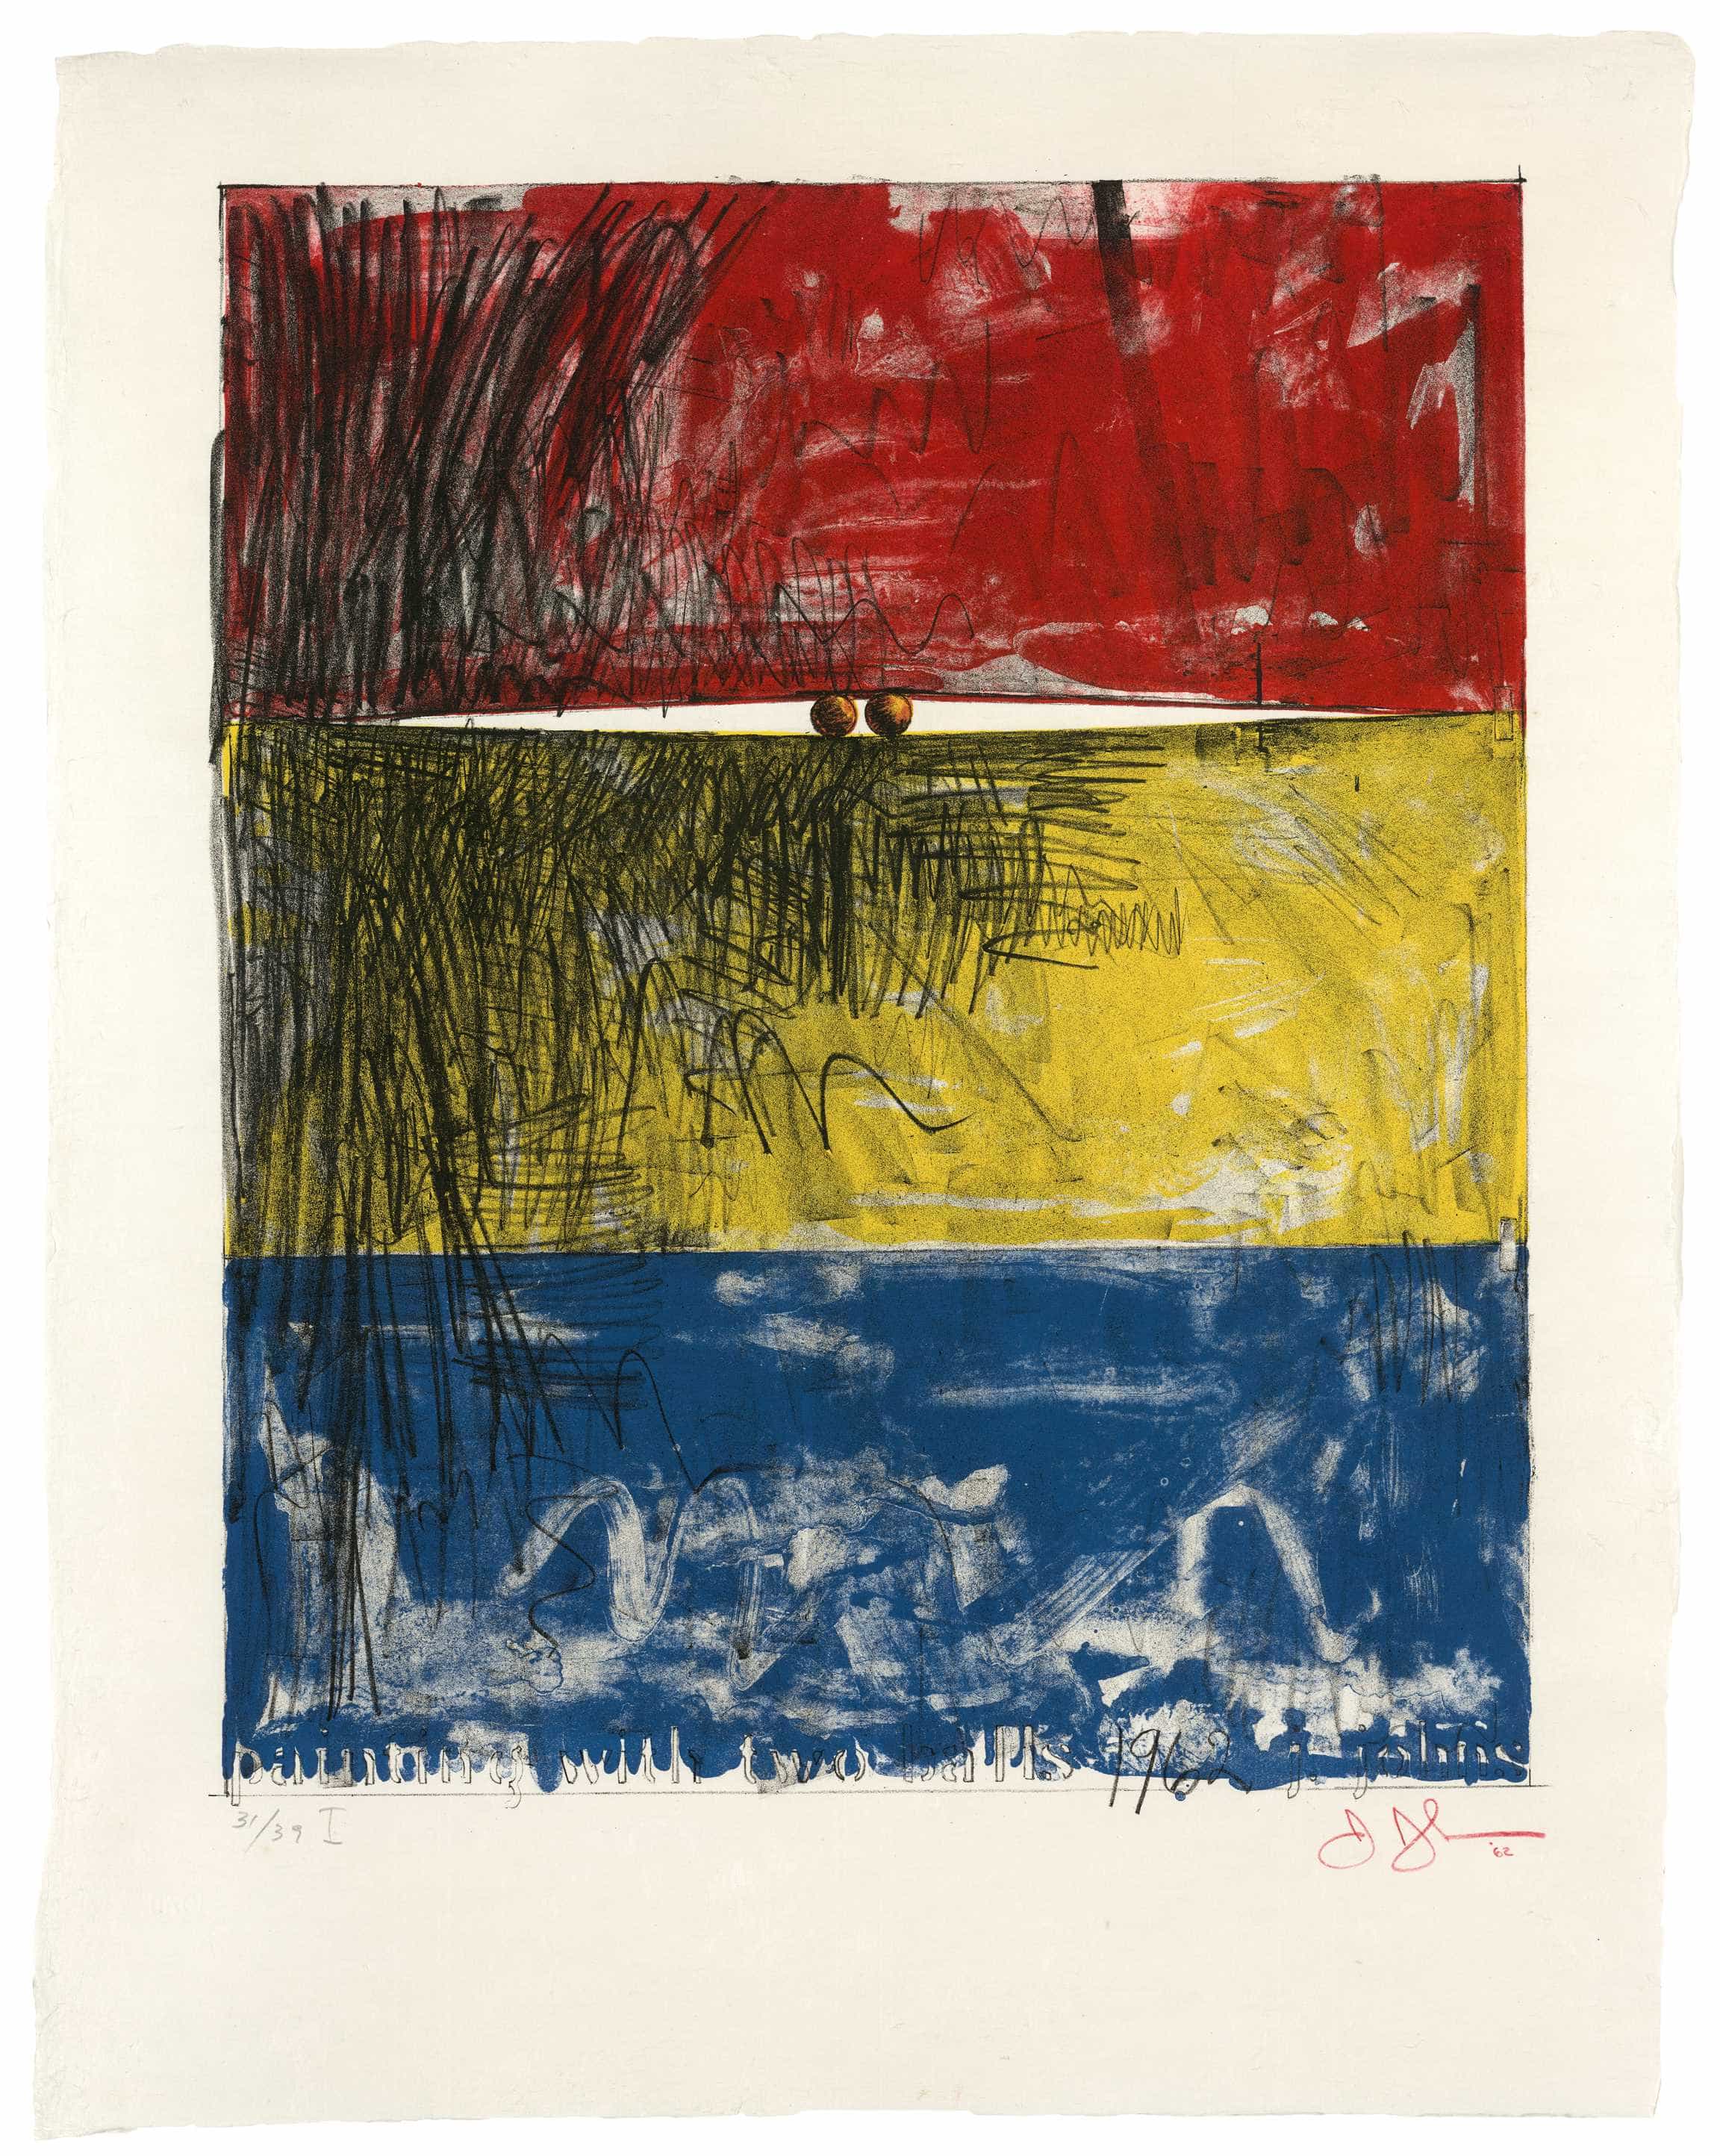 Jasper Johns, Painting with Two Balls I, 1962